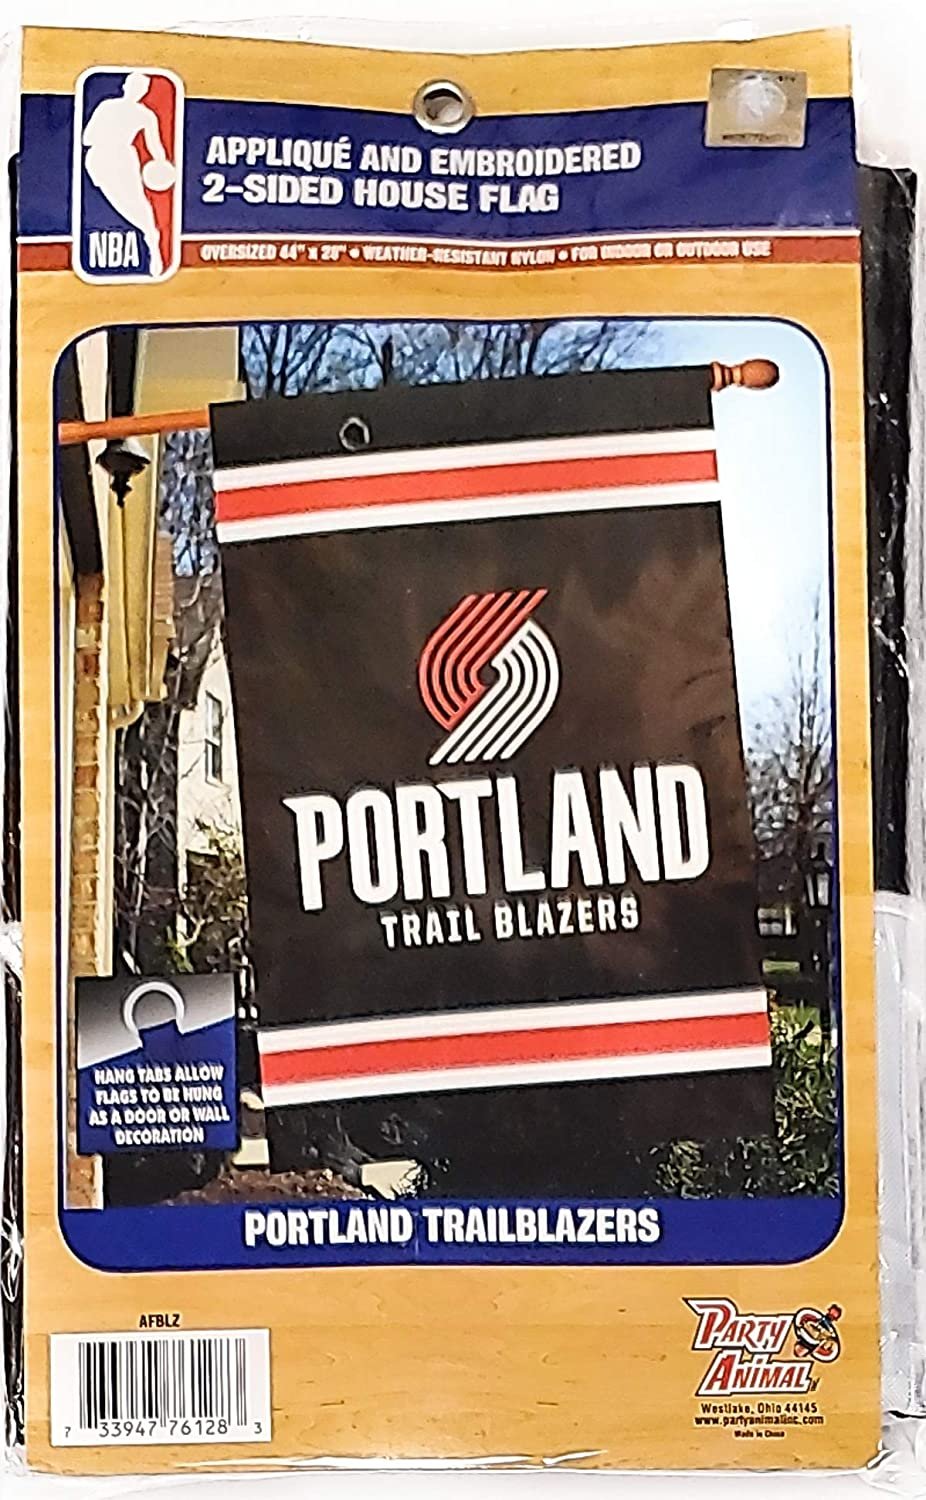 Portland Trail Blazers Premium Double Sided Banner House Flag, Embroidered Applique, 28x44 Inch